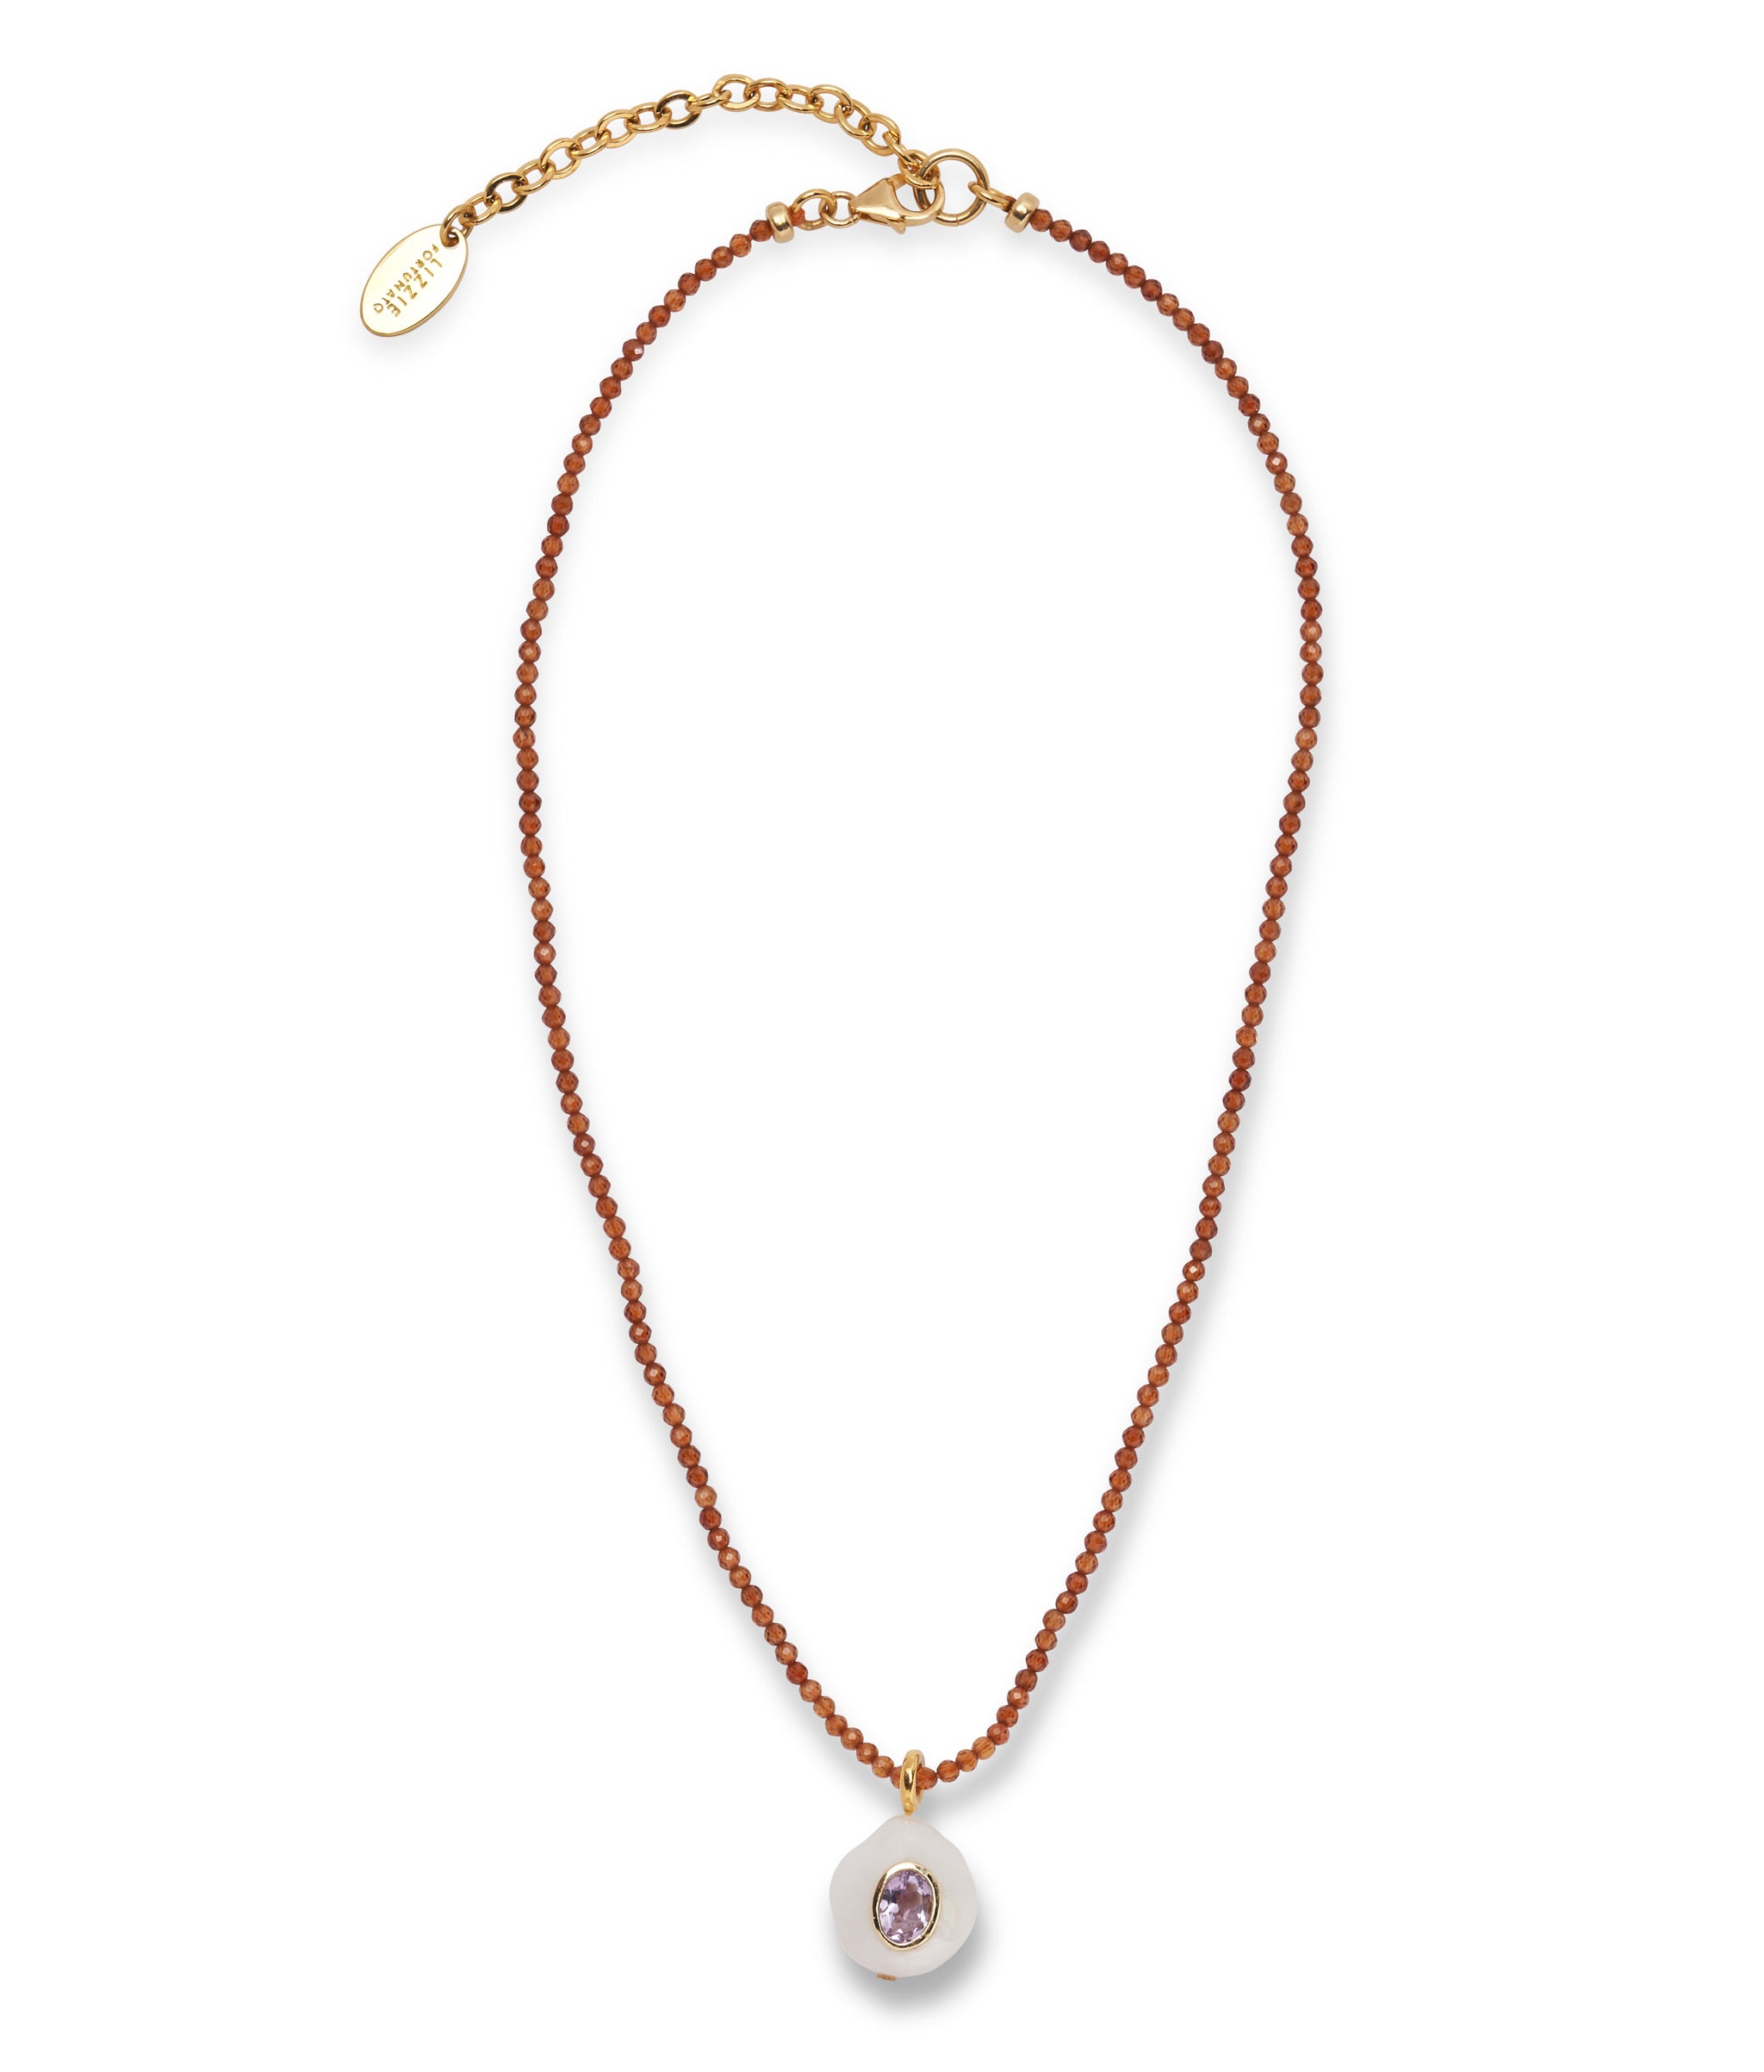 Castillo Necklace in Pearl. Small hessonite garnet beads and freshwater pearl charm inlaid with pink amethyst.